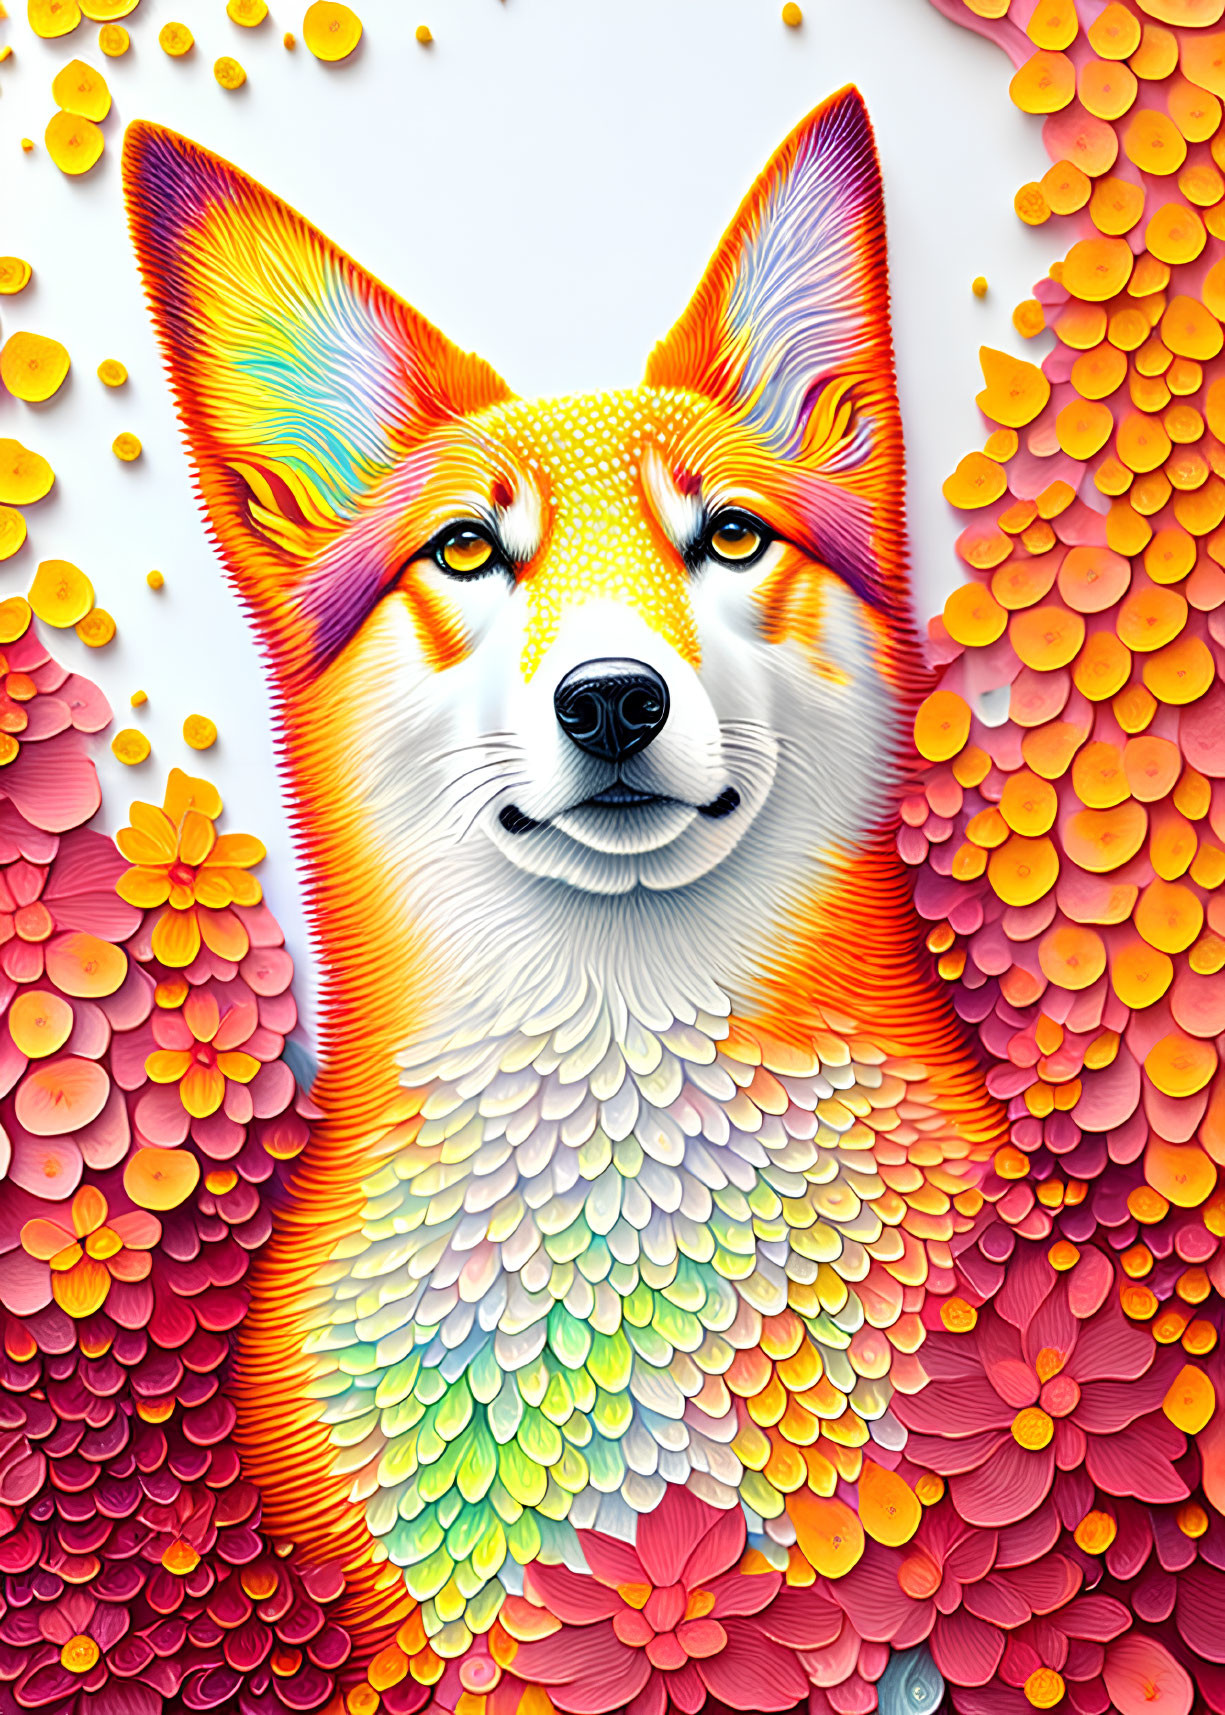 Colorful Fox Face Illustration Surrounded by Stylized Petals